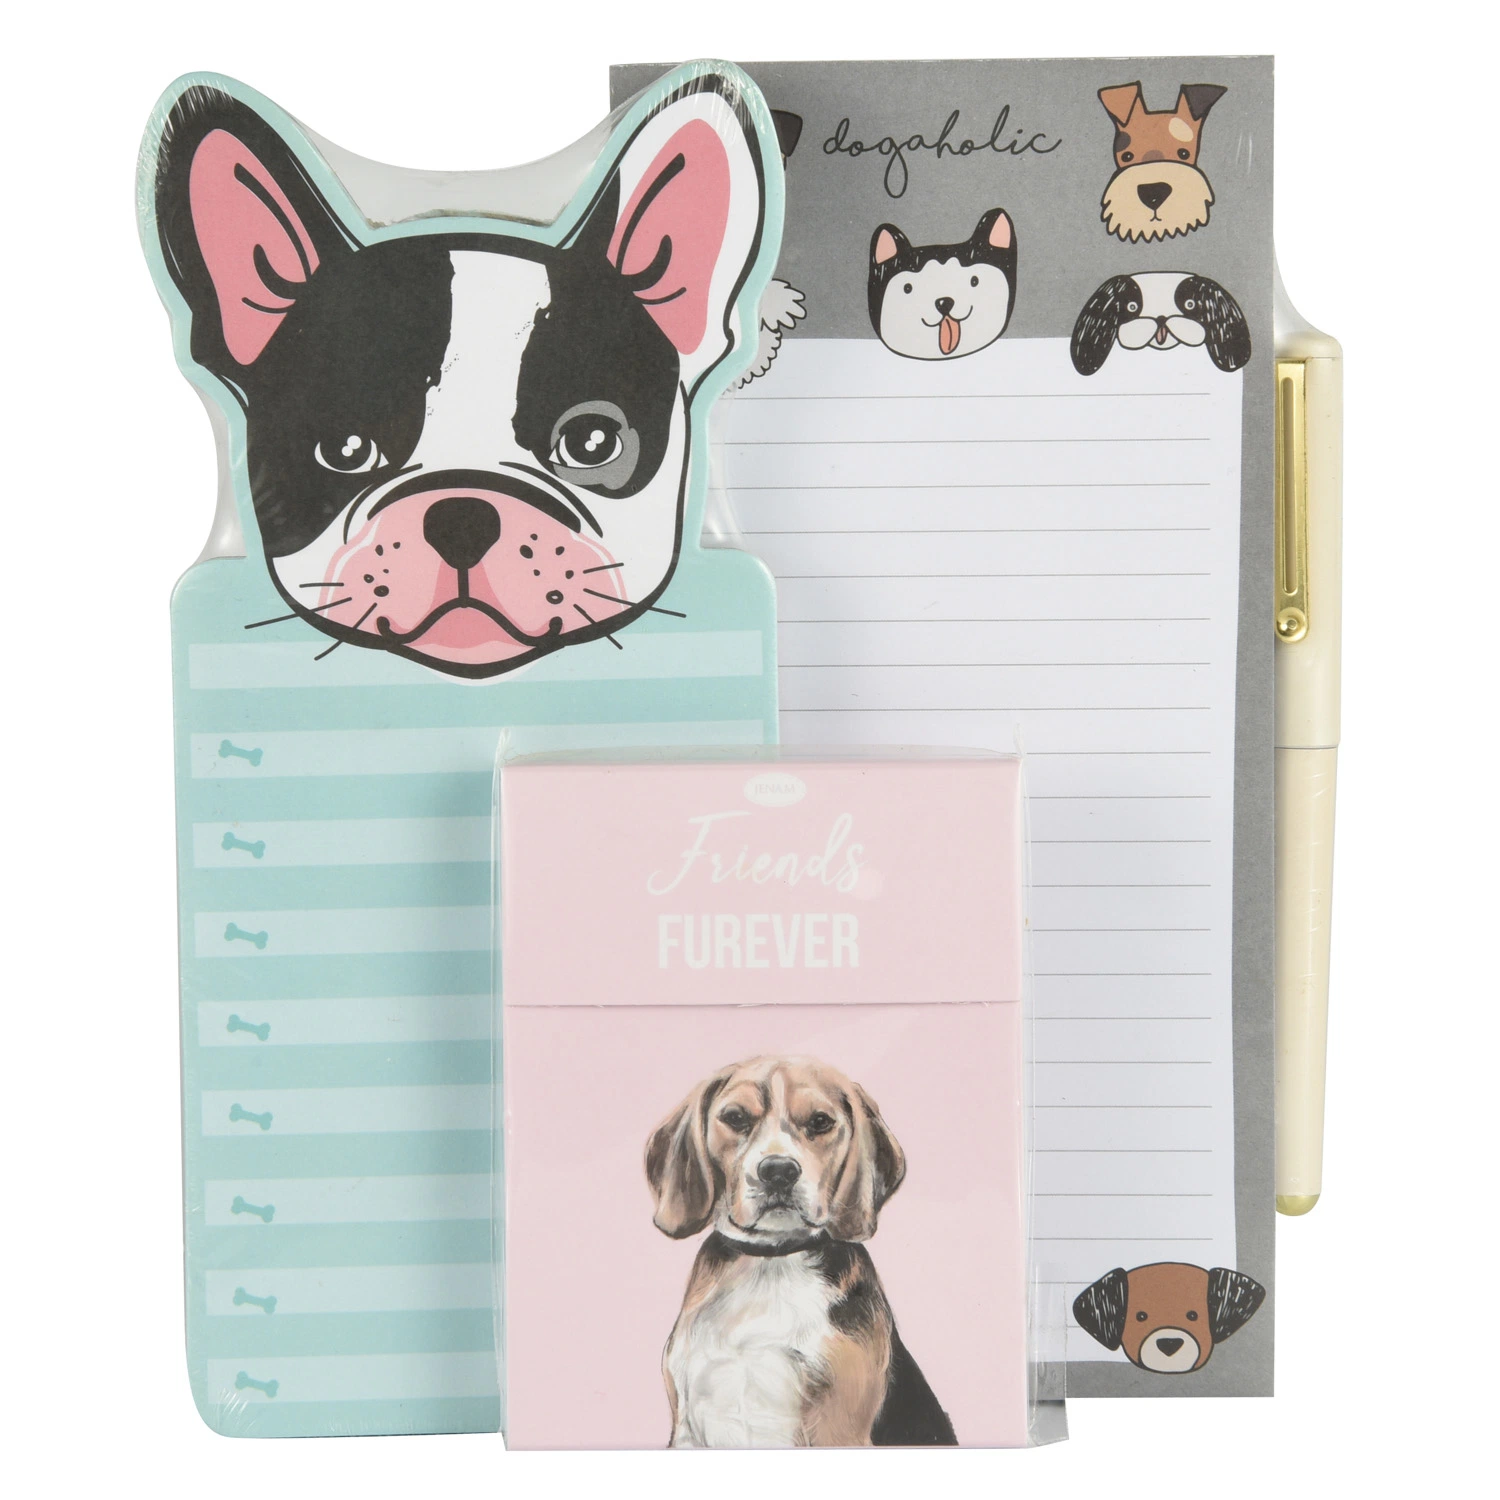 School Supplies Animal Memo Pad with Cat and Dog Stationery Products